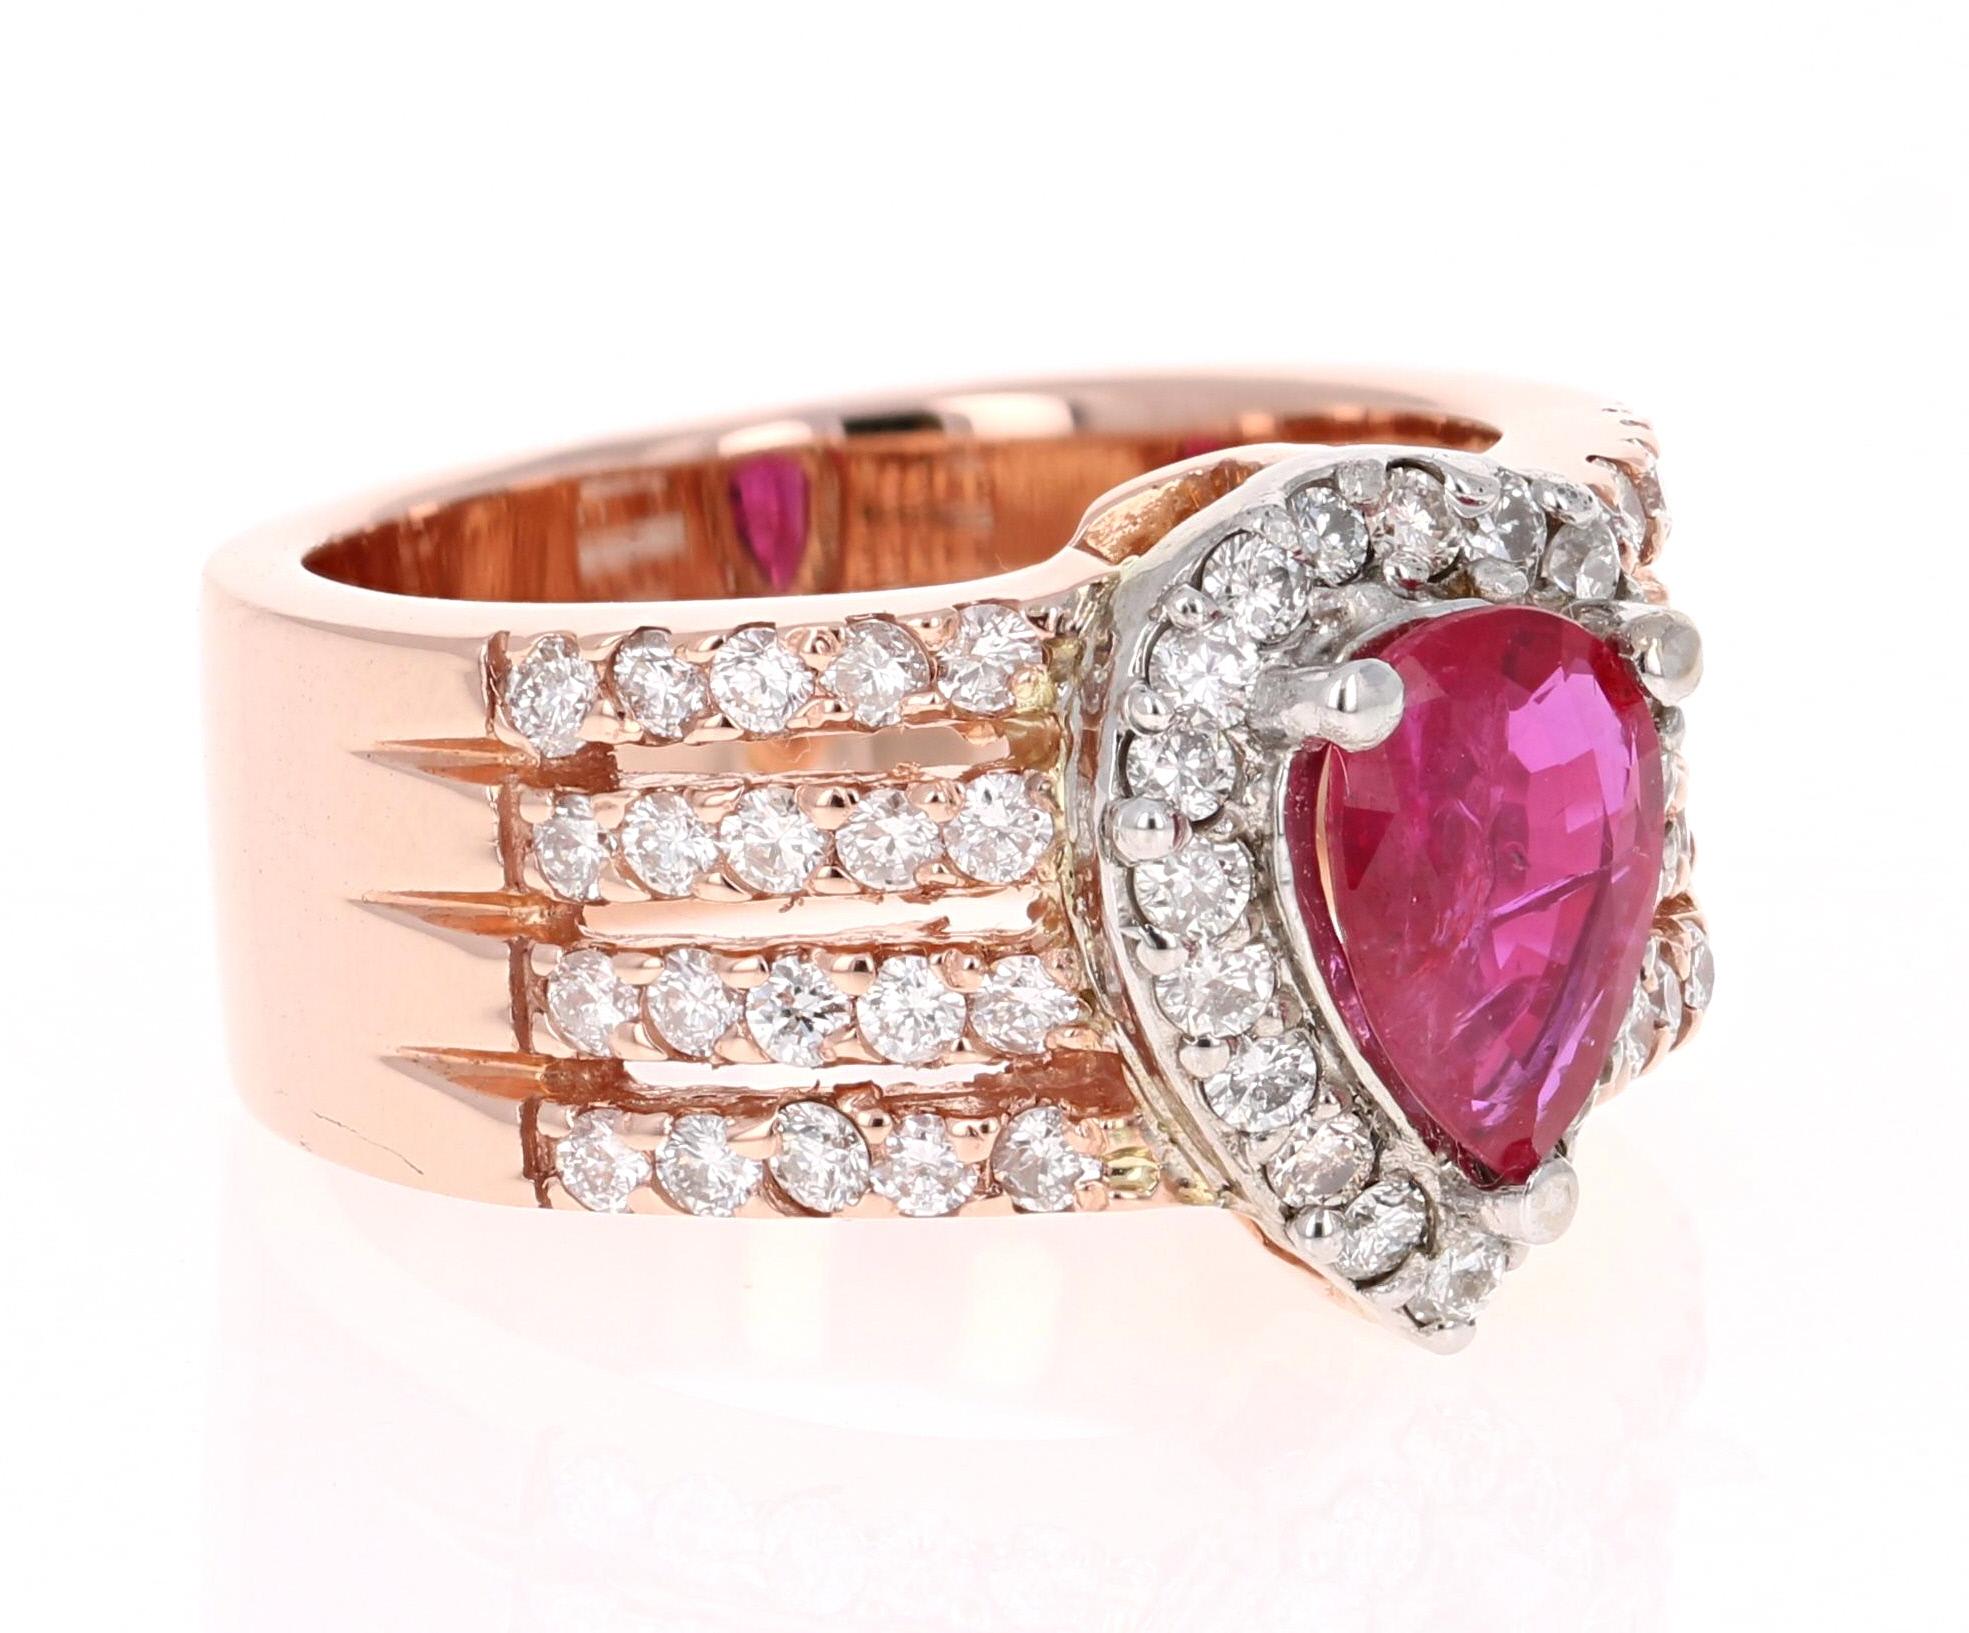 A gorgeous statement ring with a 1.10 Carat Pear Cut GIA Certified Ruby as its center and 59 Round Cut Diamonds that weigh 1.00 carats. The total carat weight of the ring is 1.87 carats.

The Pear Cut Ruby is natural and has no heat. The GIA